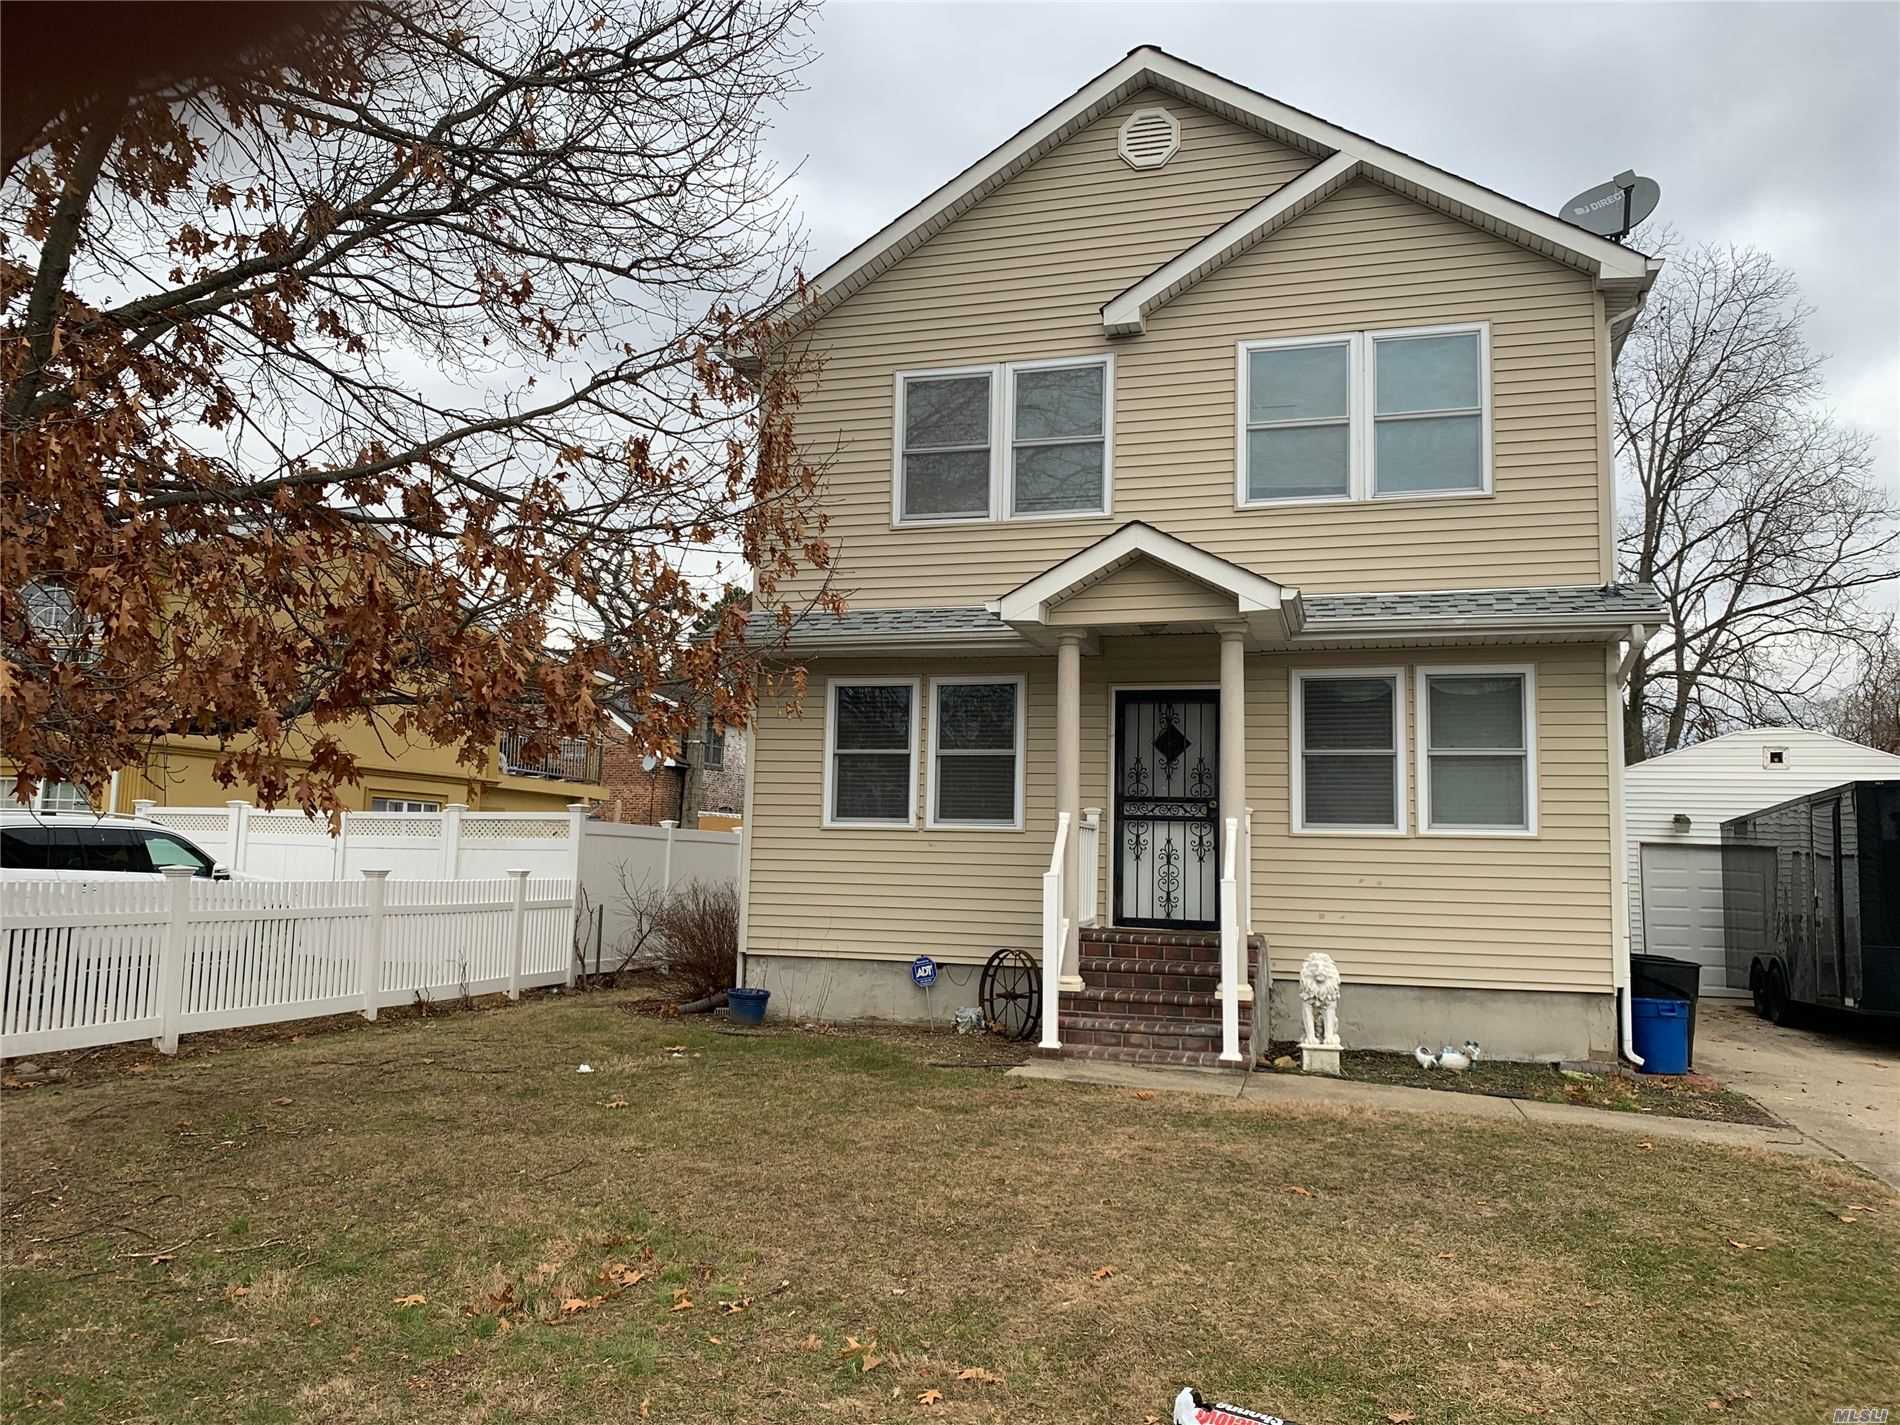 Property is located dead end street near Southern State Parkway. Close to schools, malls, train station and other transit. Home features nice size bedrooms, hardwood floors, 2 car garage. and well kept landscaped property. Come look inside this completely renovated home in 2010